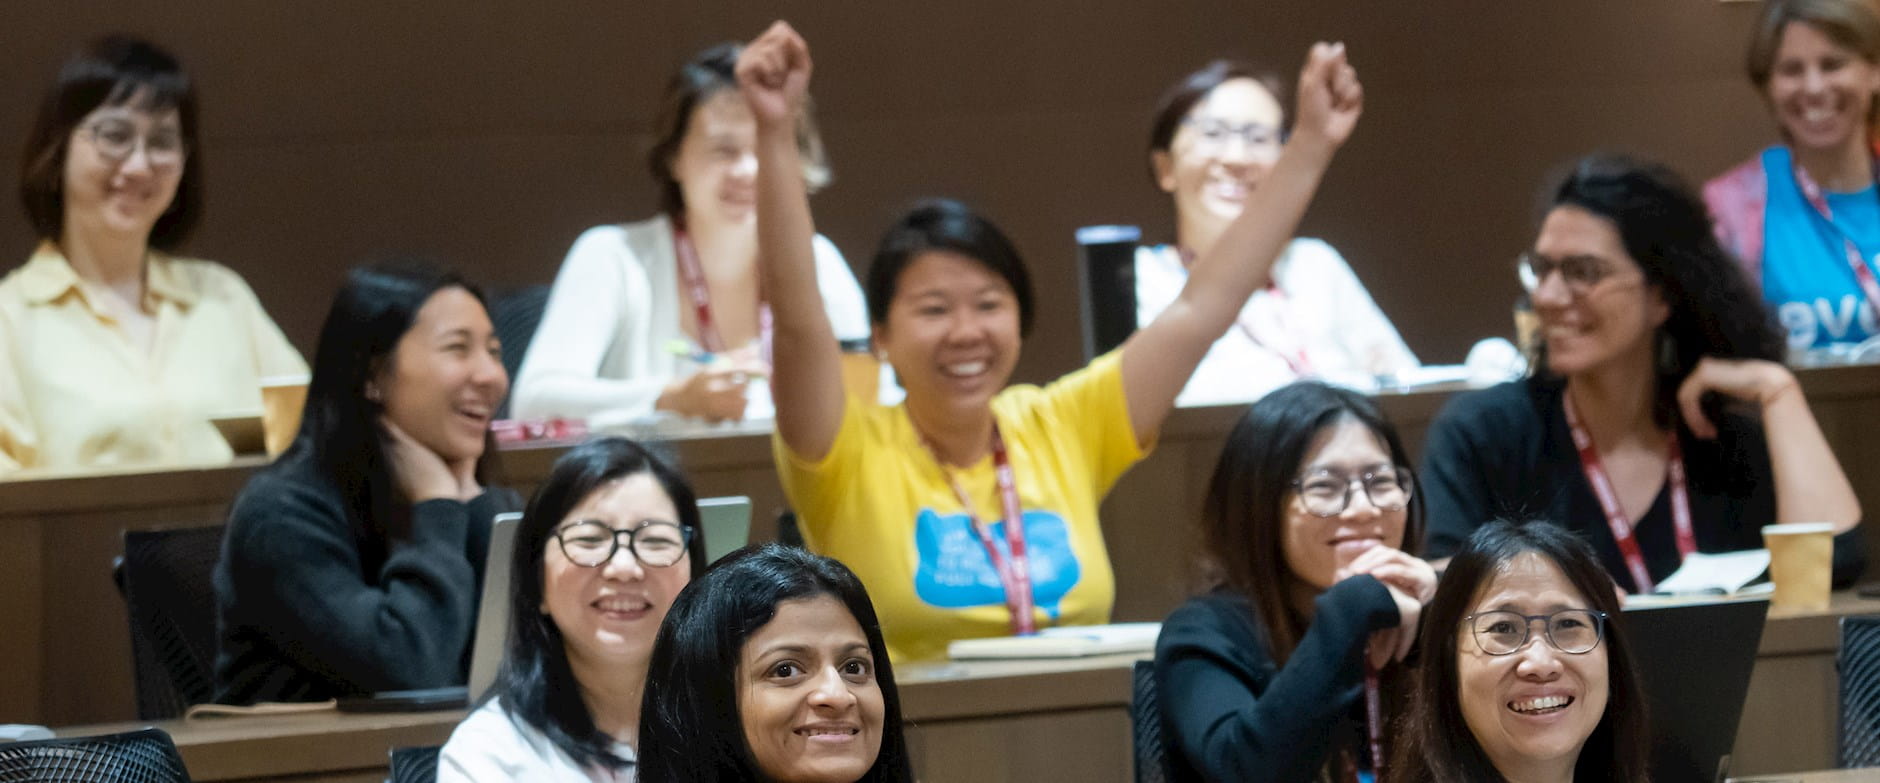 Classroom with people smiling and one person raising arms